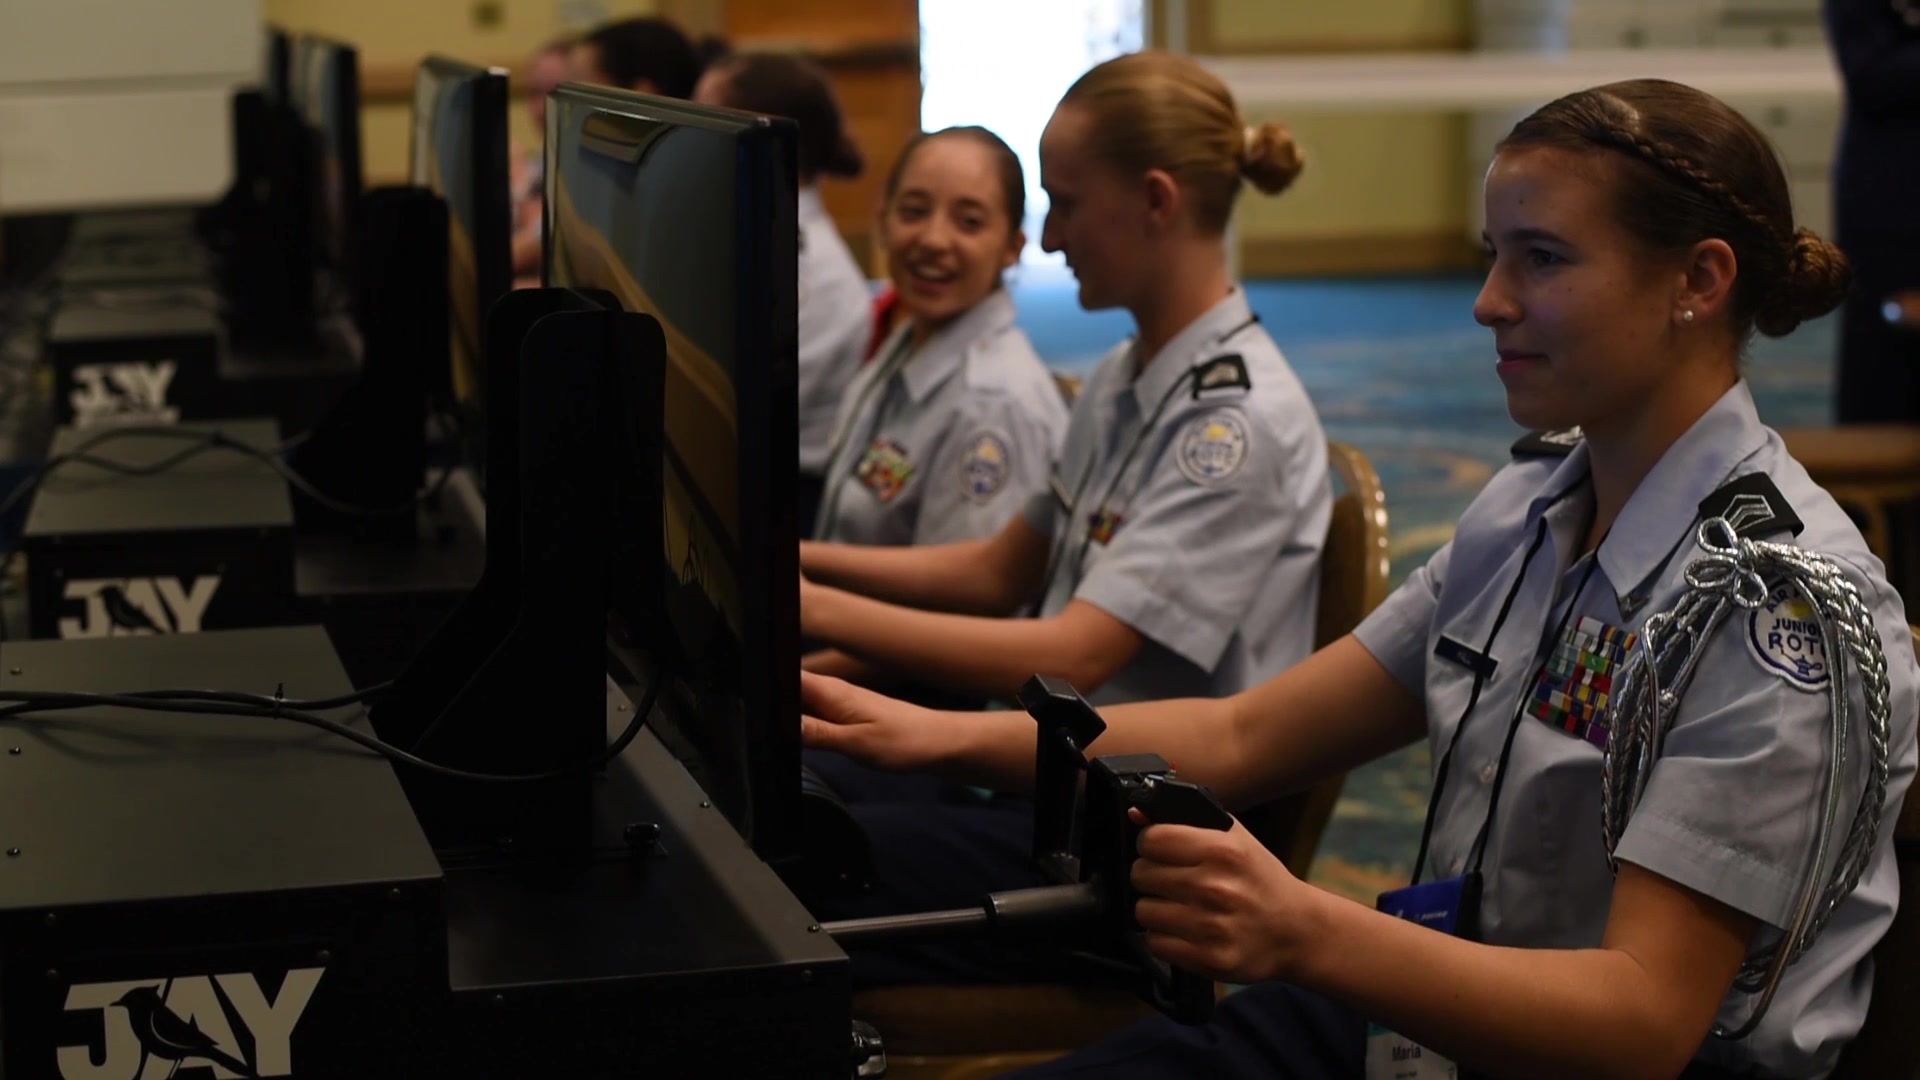 Air Force JROTC cadets and Flight Academy graduates attend the Women in Aviation International conference in Long Beach, California.